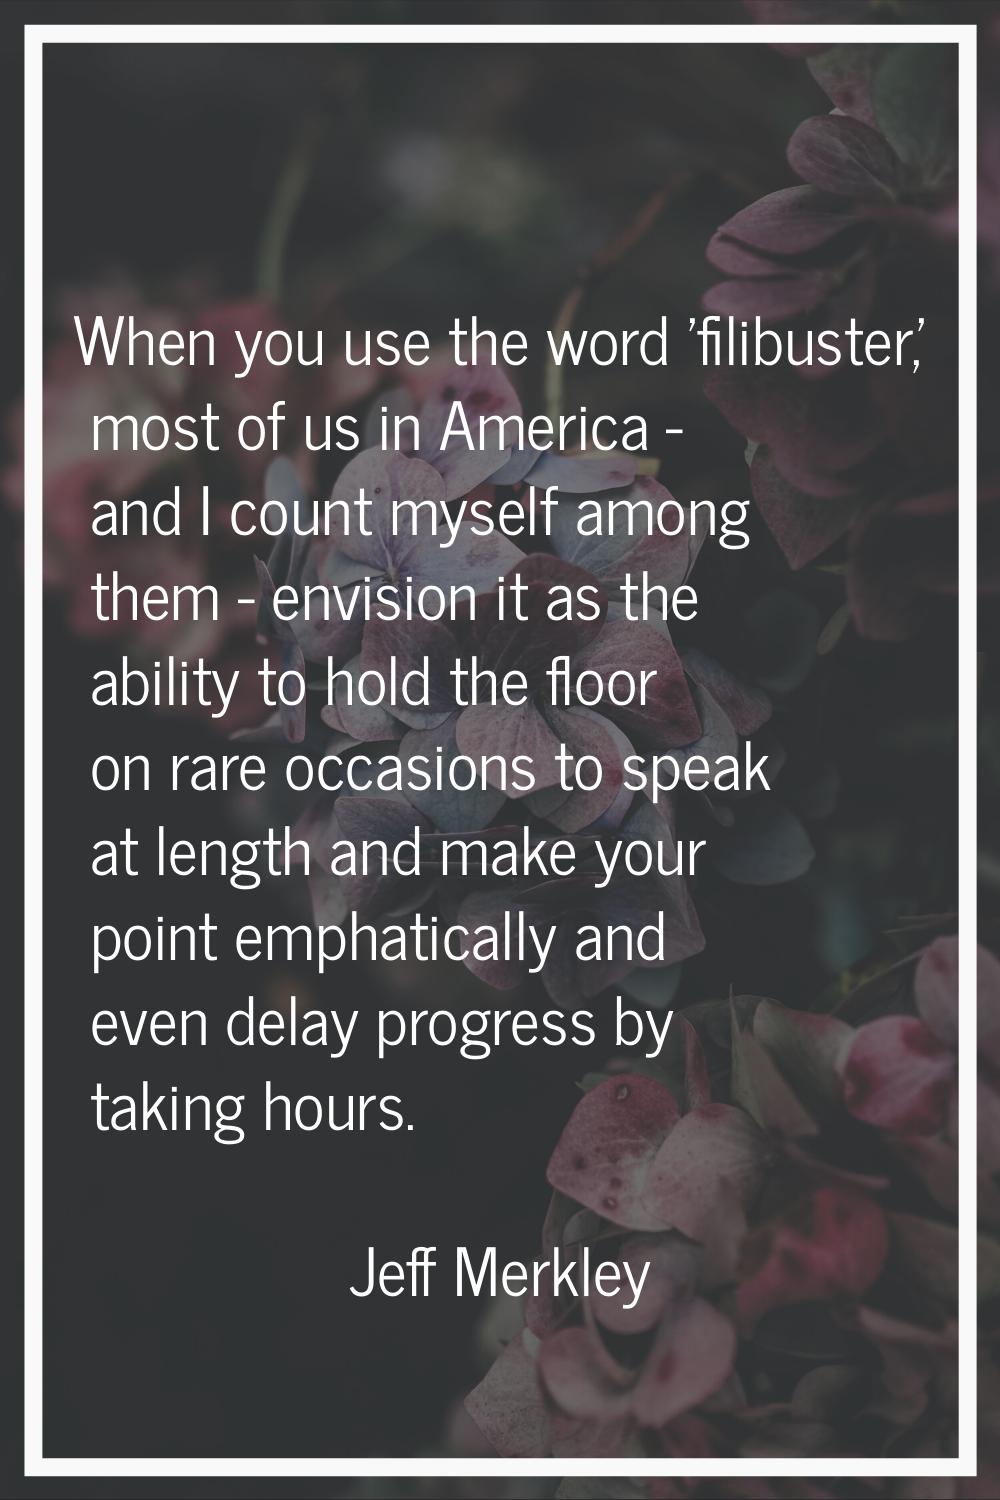 When you use the word 'filibuster,' most of us in America - and I count myself among them - envisio